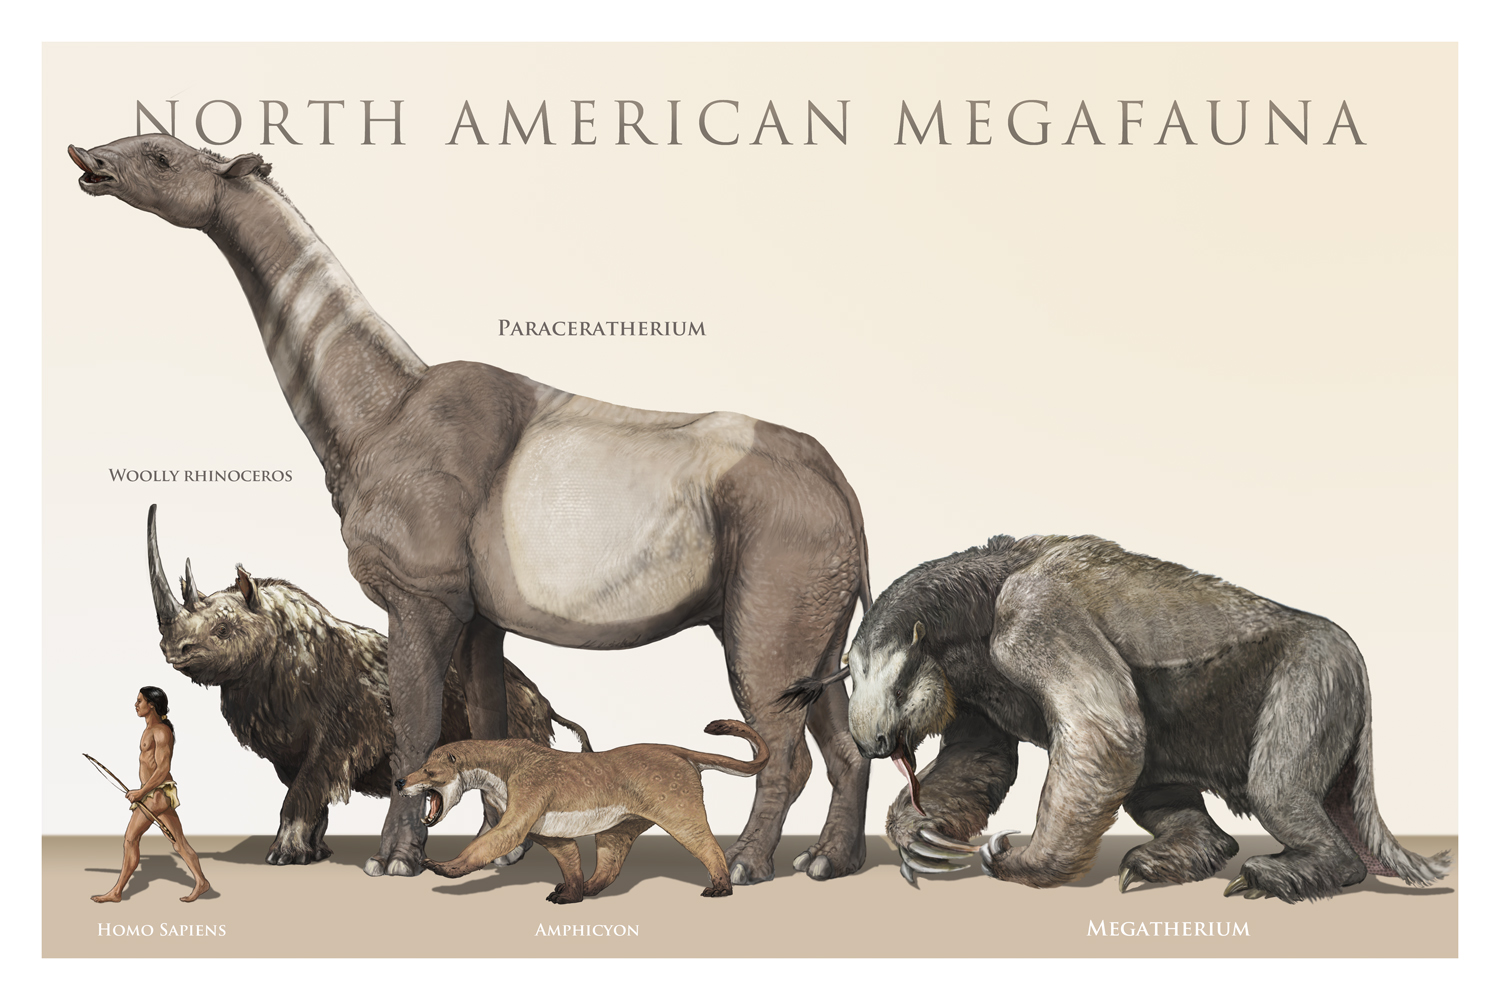 A few of the many North American megafauna which co-existed with the paleoindians. (nearly all of which went extinct at the end of the ice age (which we correlate with the "great dearth" spoken of in the Book of Mormon).